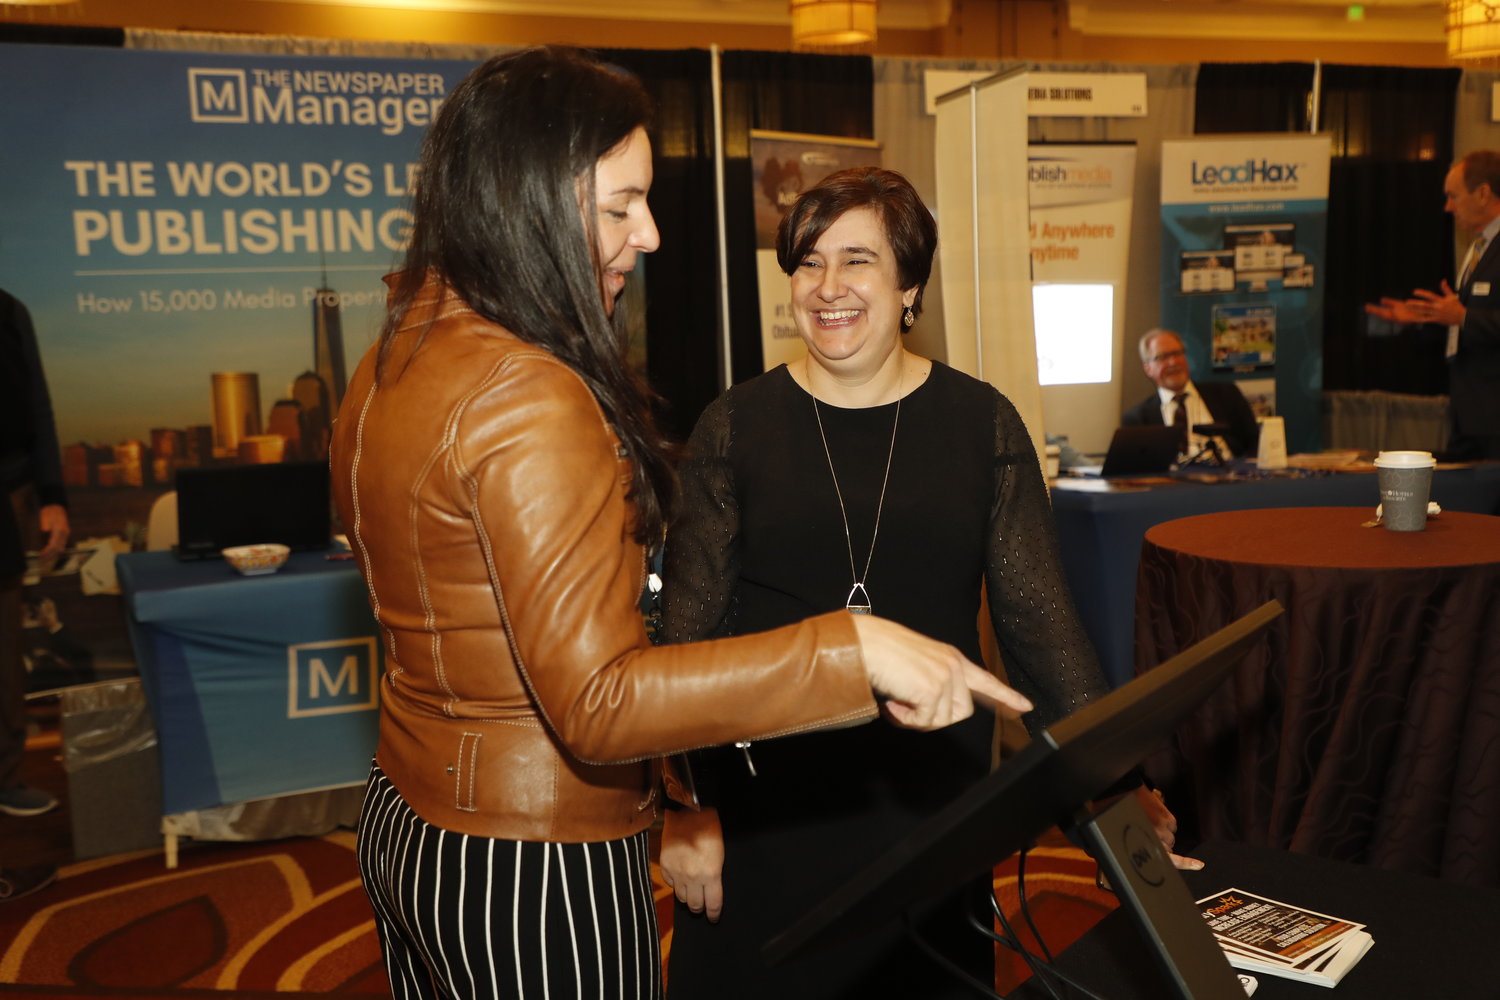 Monday photos of the 2020 Mega-Conference at the Omni Hotel in Fort Worth, Texas, Feb. 17, 2020. (Photo by Bob Booth)